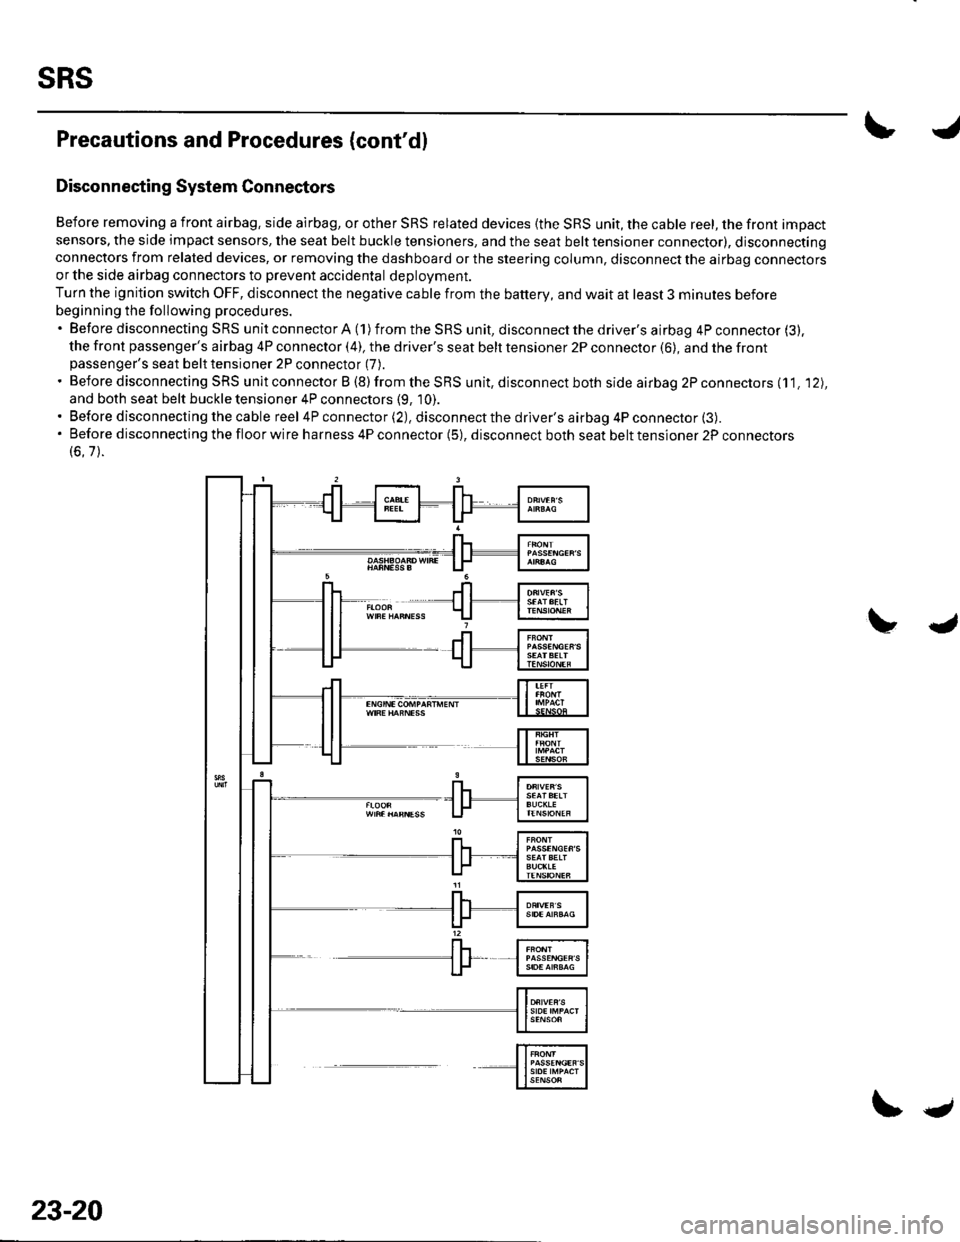 HONDA CIVIC 2002 7.G Workshop Manual sRs
Precautions and Procedures (contdl
Disconnecting System Connectors
Before removing a front airbag. side airbag, or other SRS related devices {the SRS unit, the cable reel, the front impact
sensor